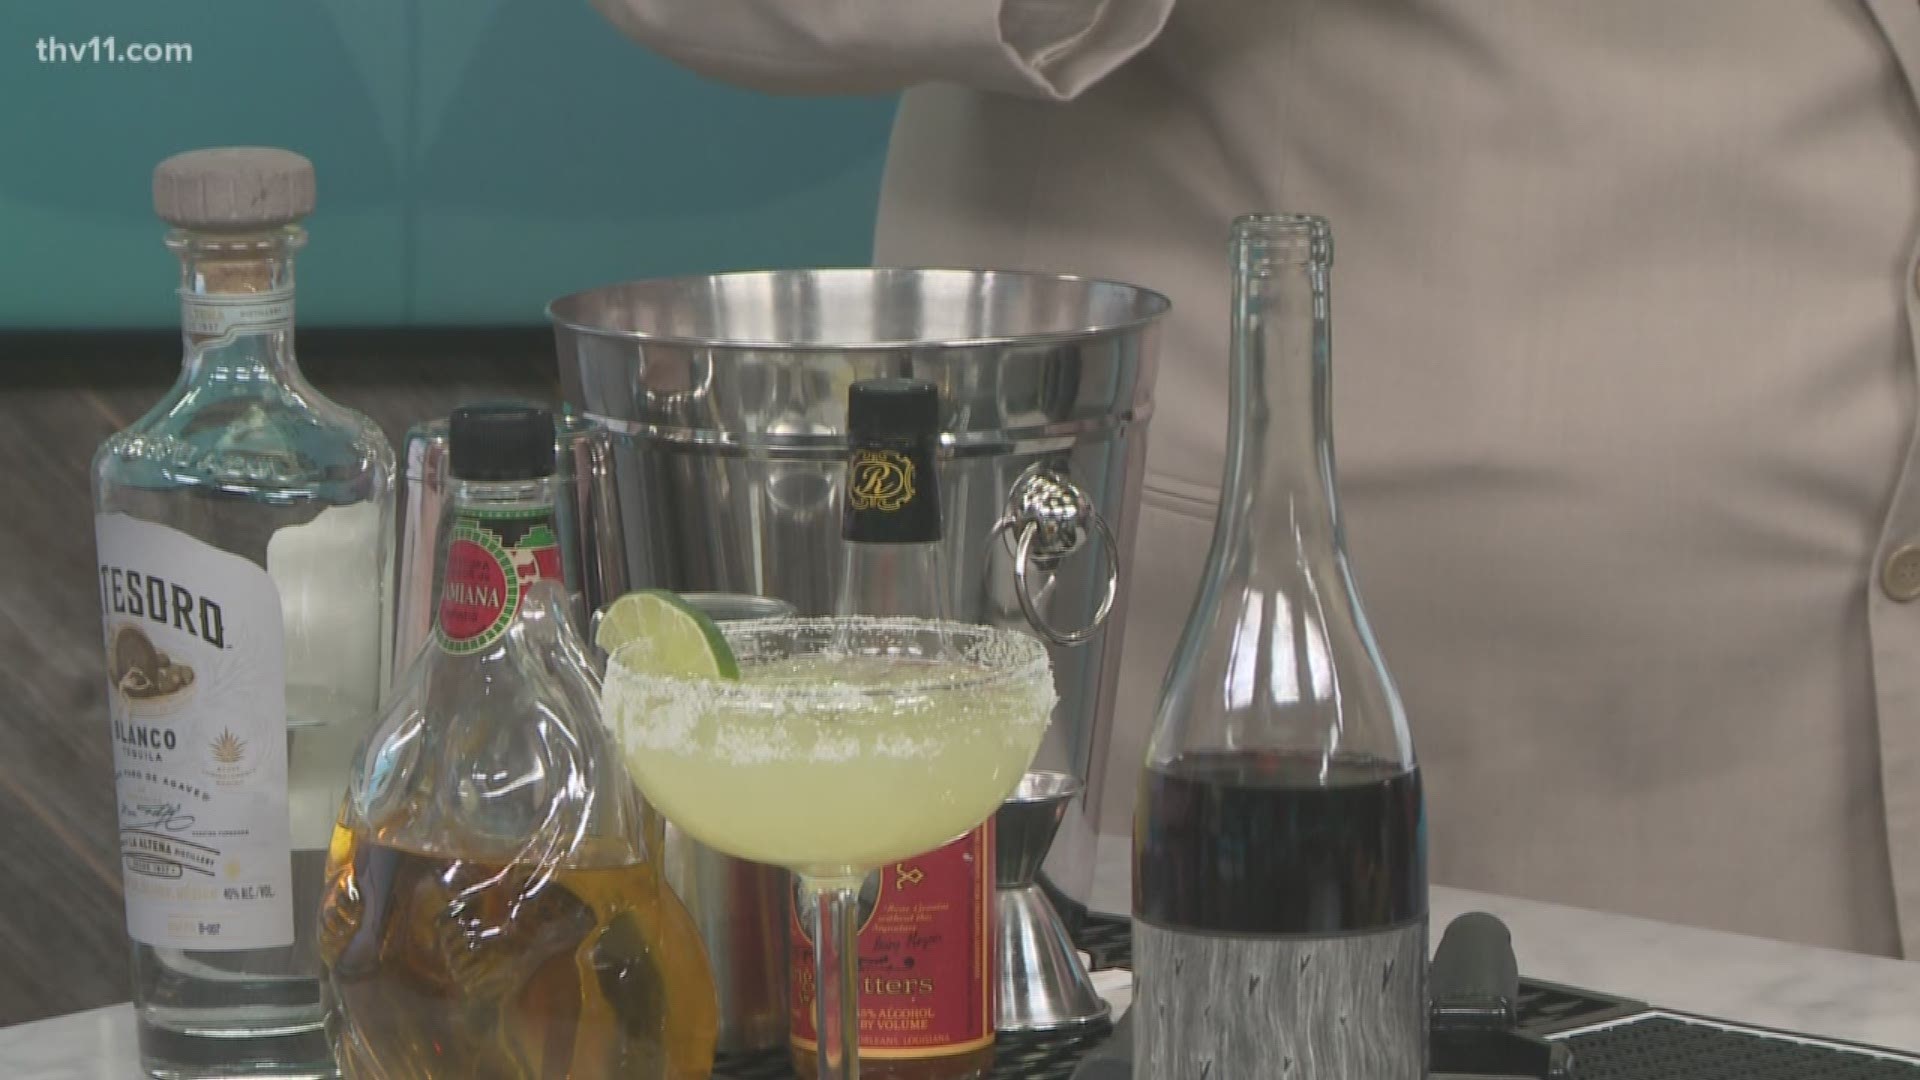 Dillon Garcia with Arkansas Mixology Associates has some delicious ideas for cocktails sure to get your sweetheart in the mood for love.